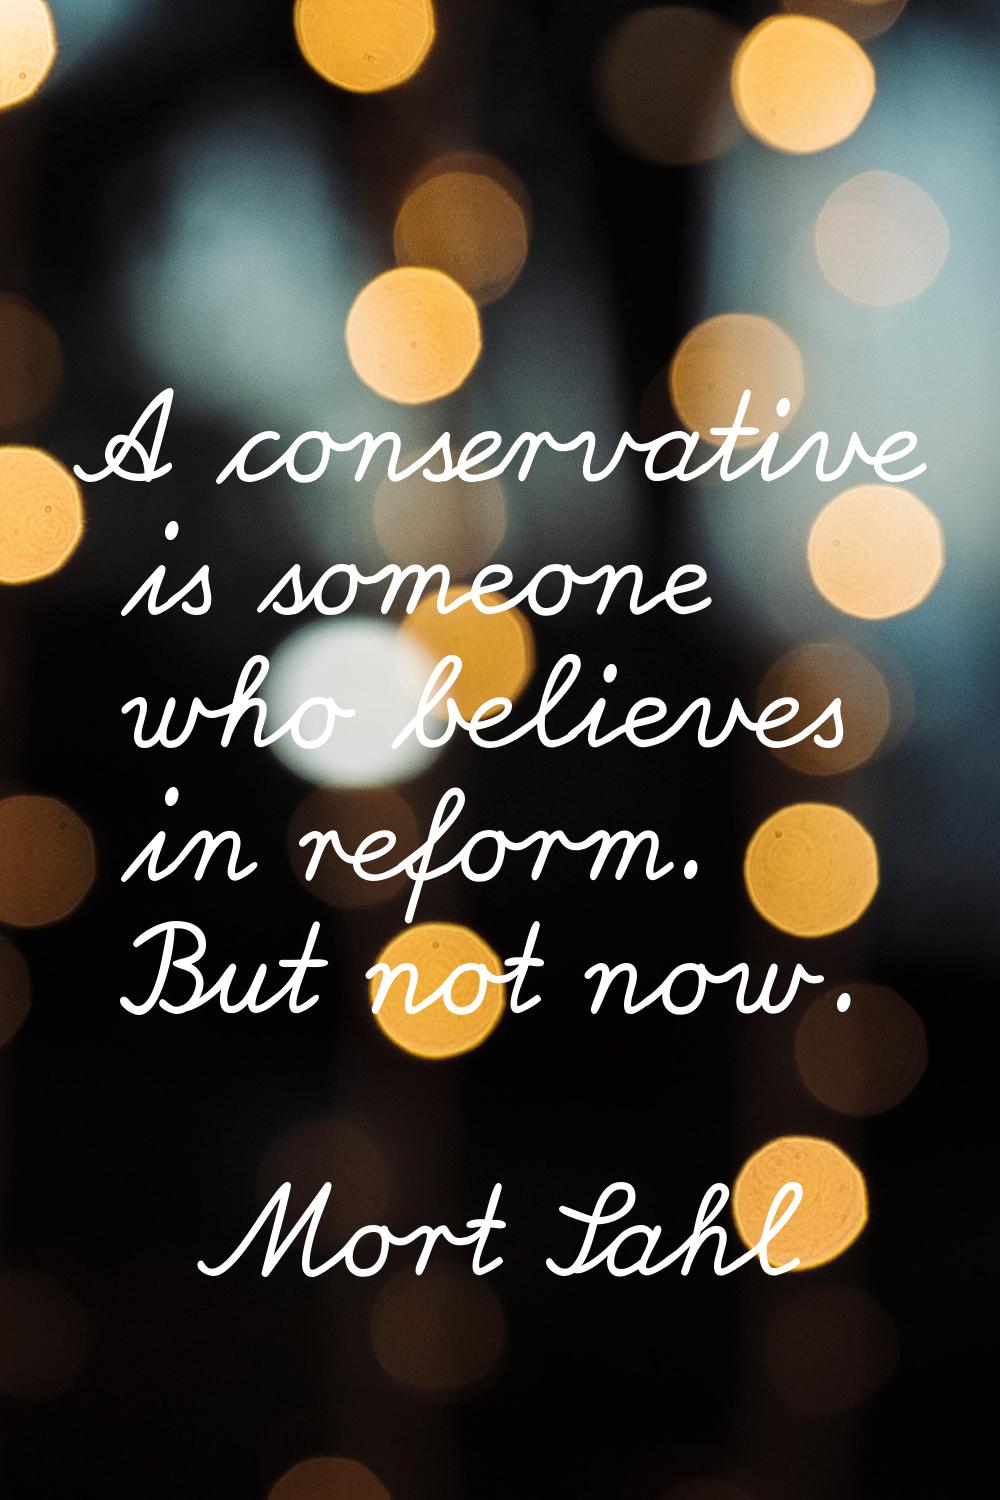 A conservative is someone who believes in reform. But not now.